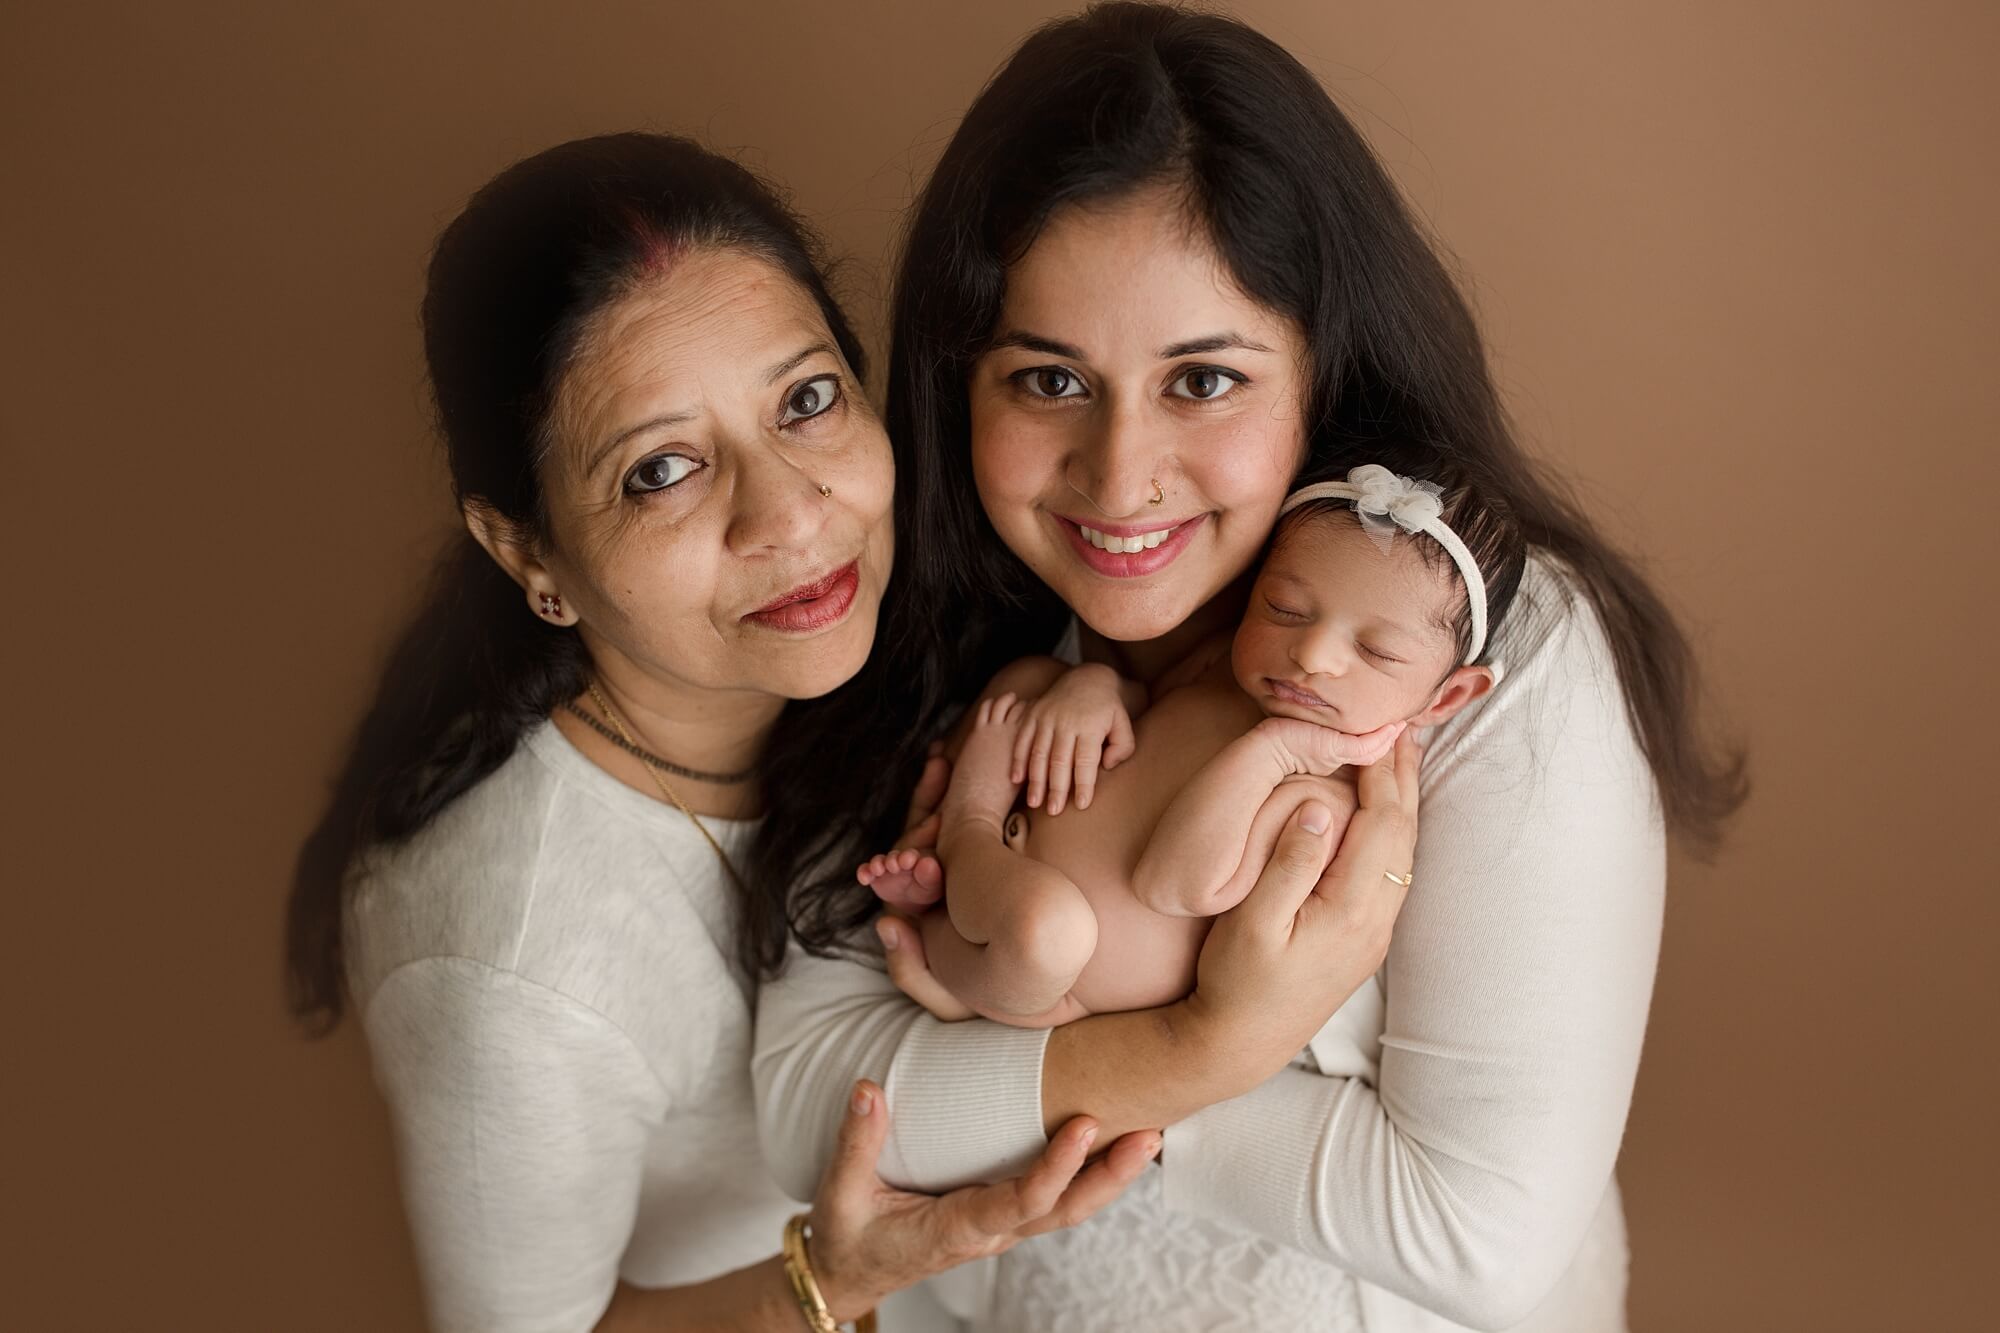 bellevue newborn photographer | indian baby family session